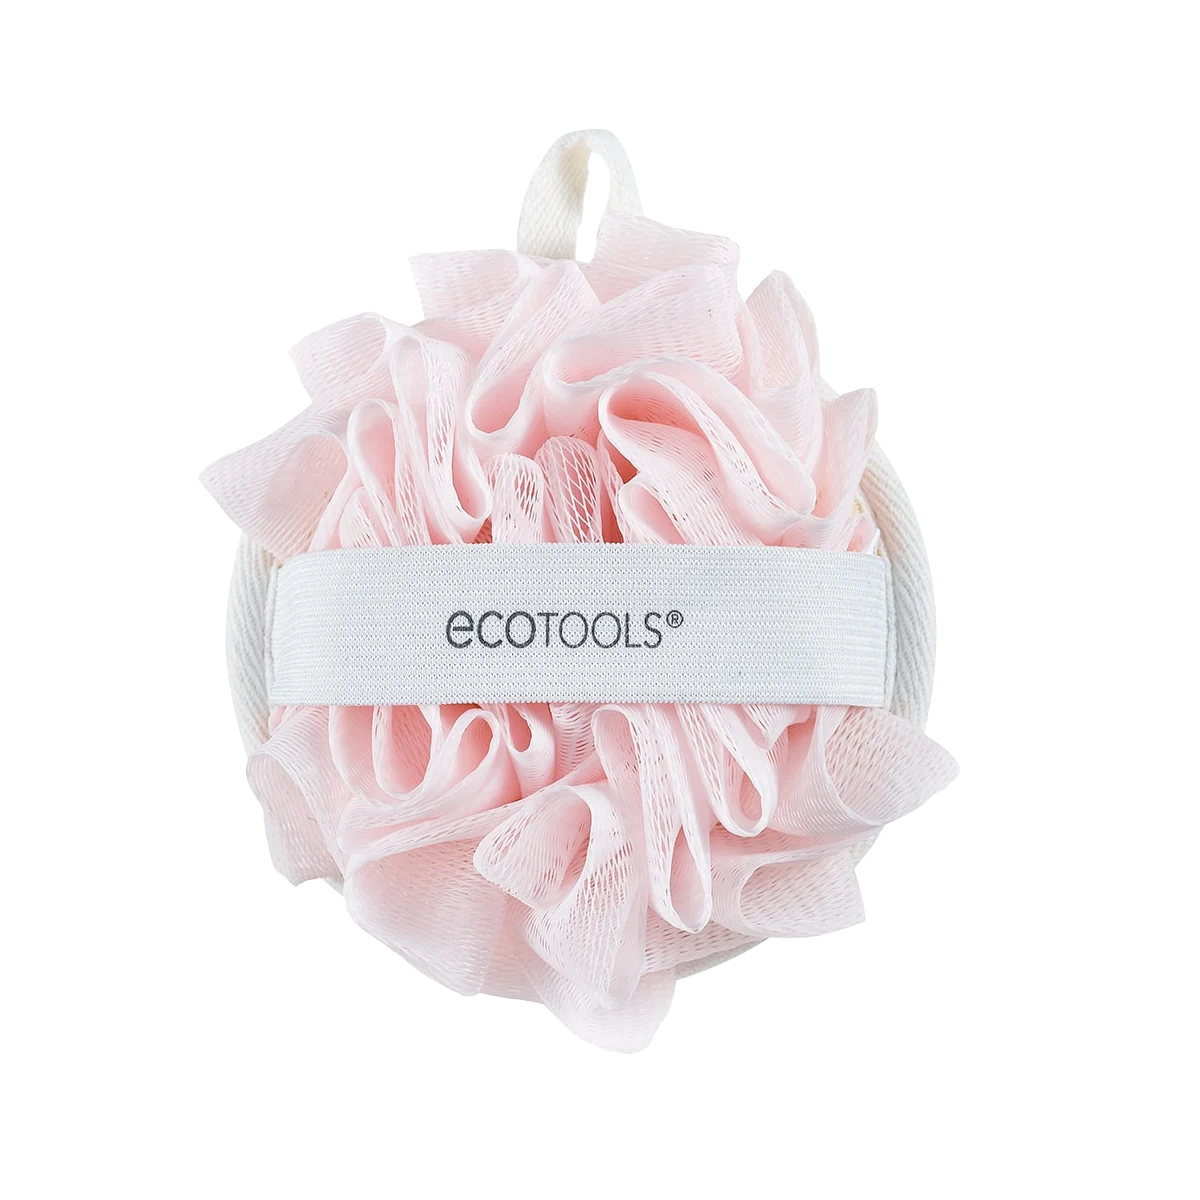 Ecotools Ecopouf Dual Cleansing Pad